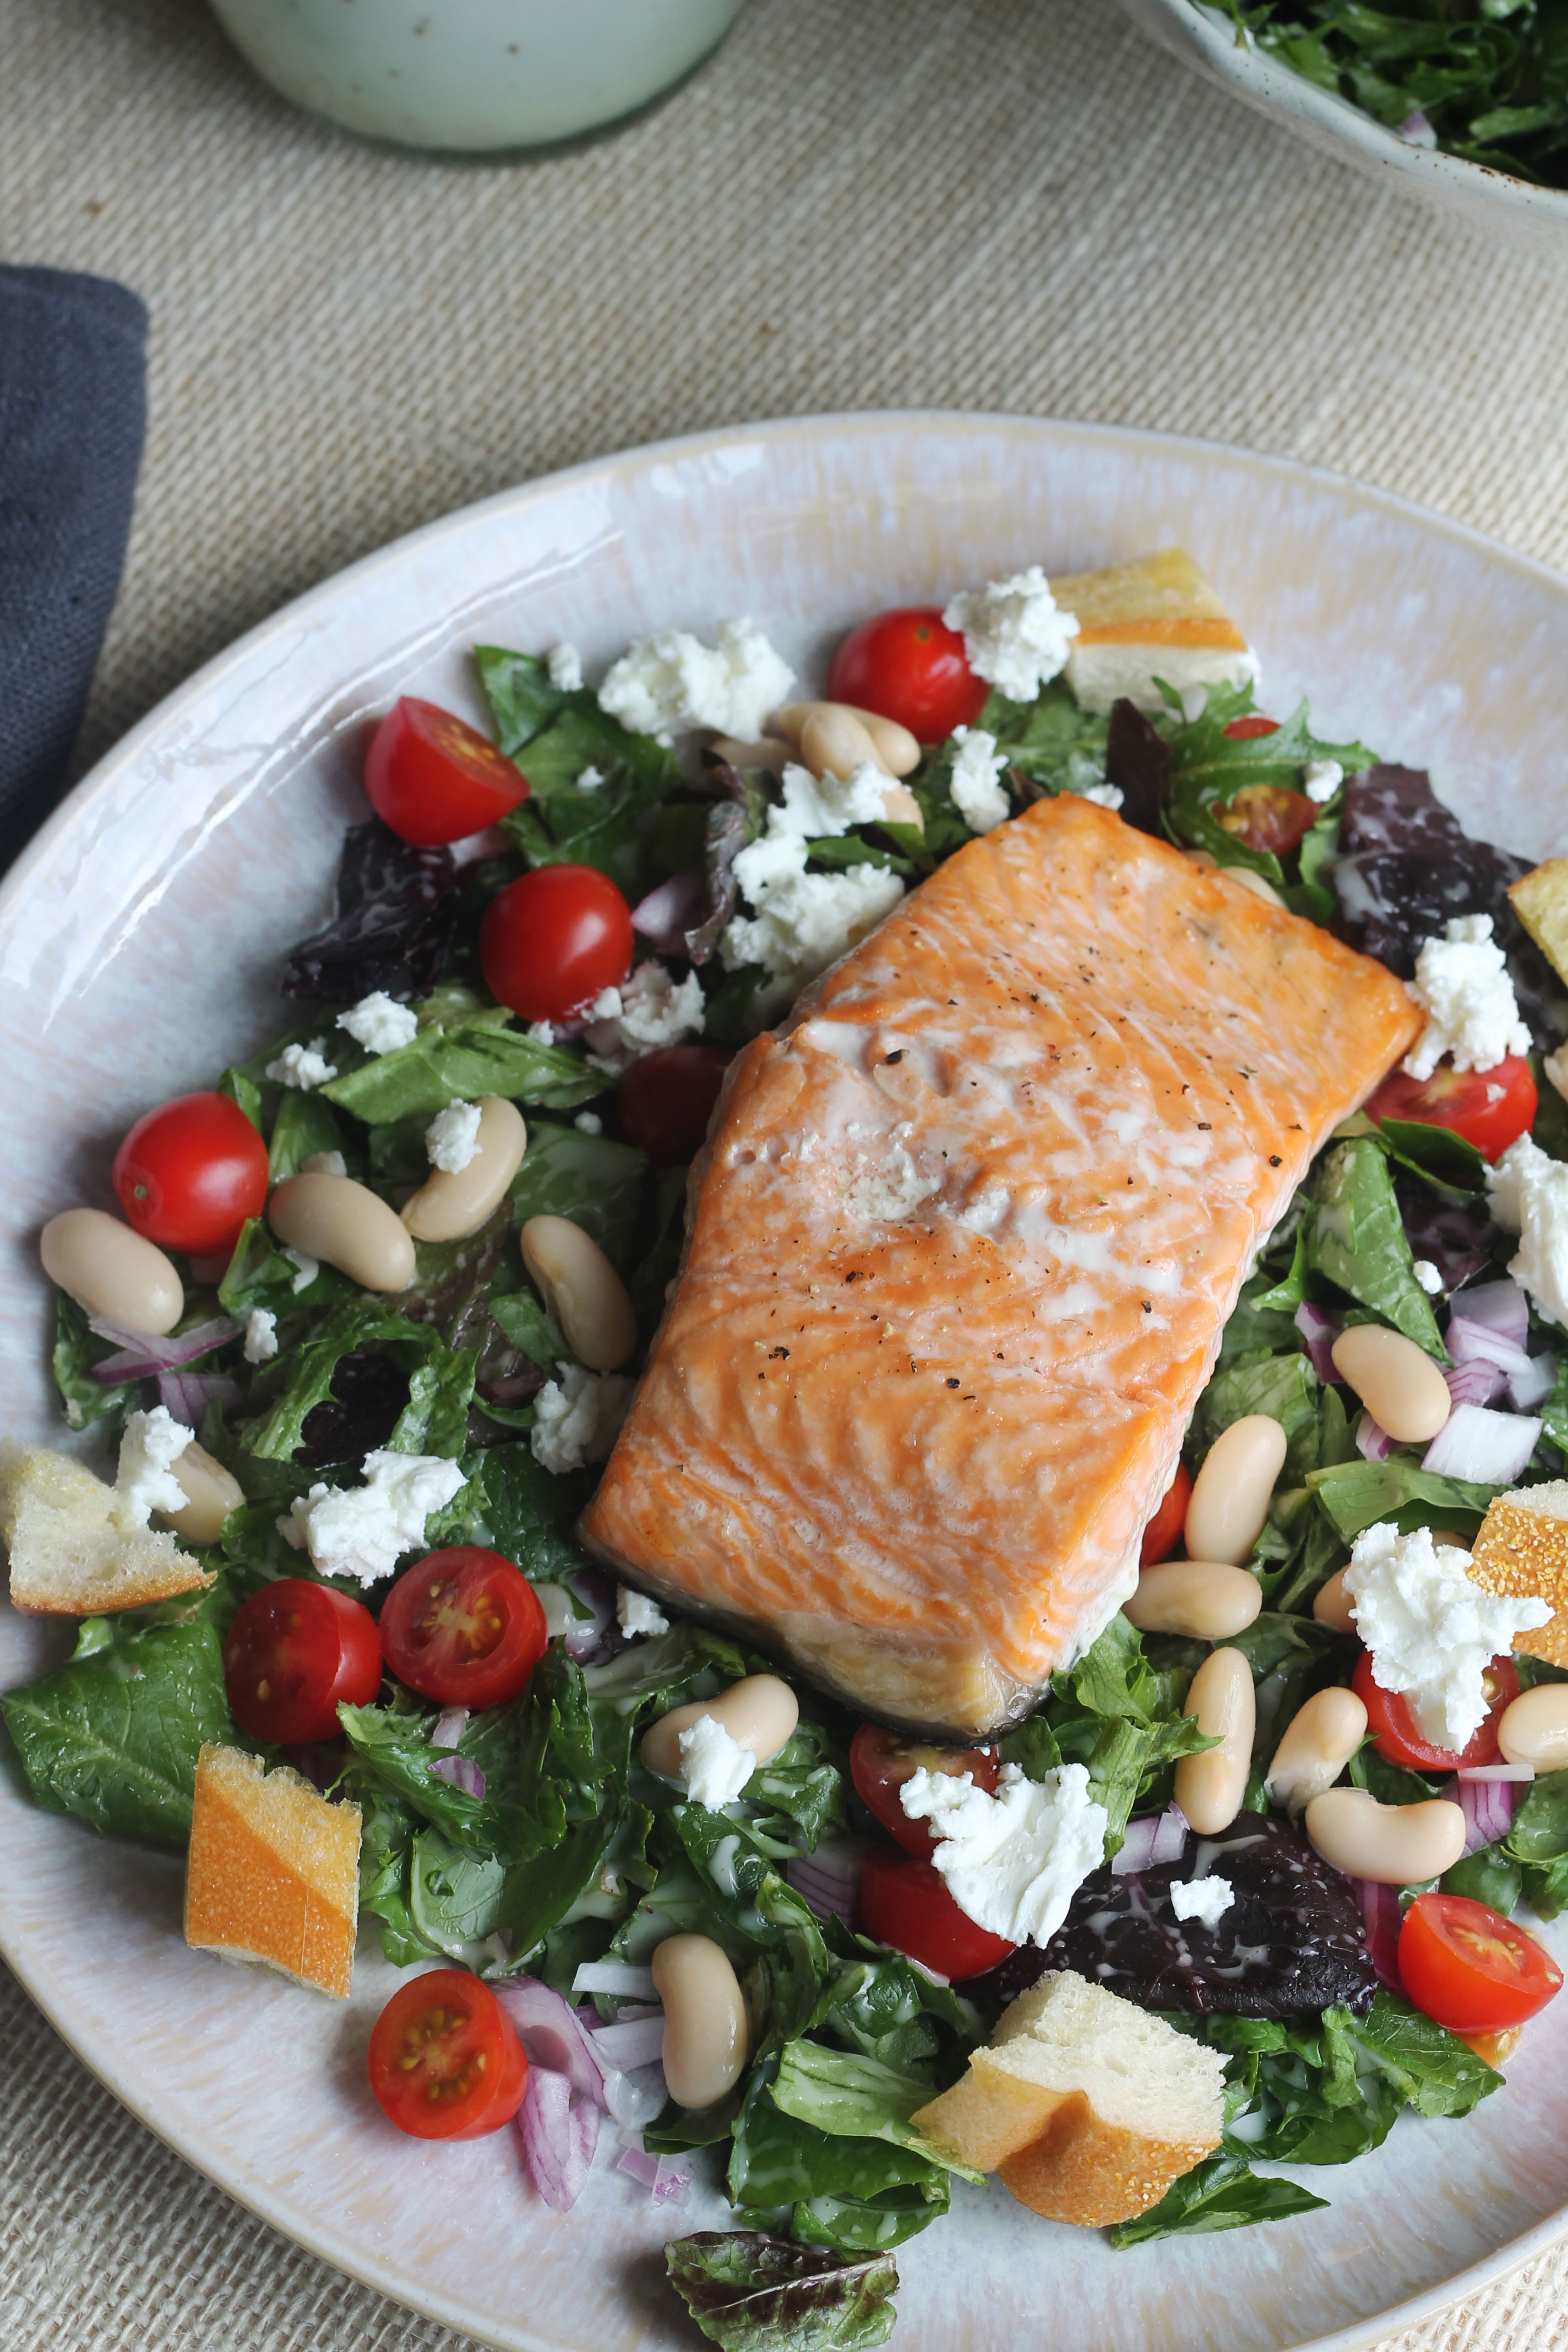 This Salmon Panzanella Salad is light and refreshing - perfect for this time of year